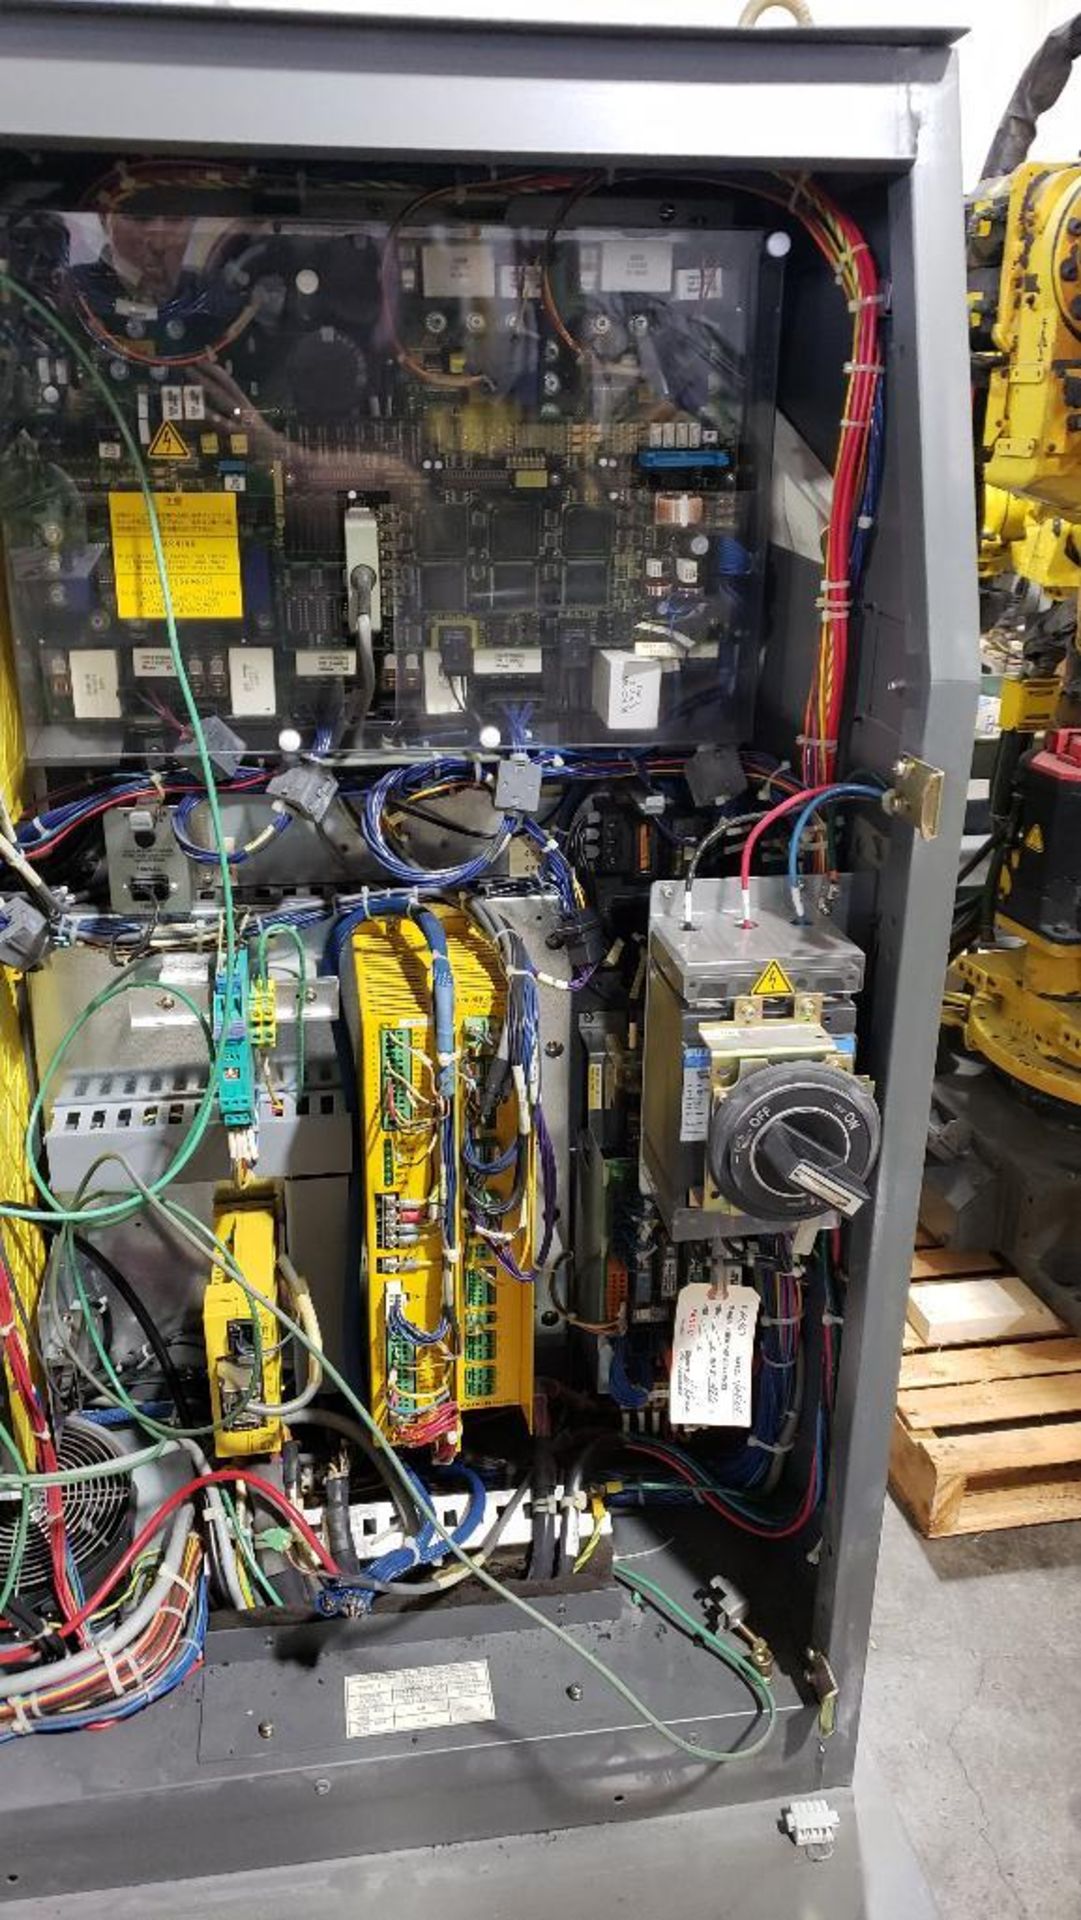 Fanuc R-2000iA/200F robot with Fanuc System R-J3iB controller. - Image 13 of 16